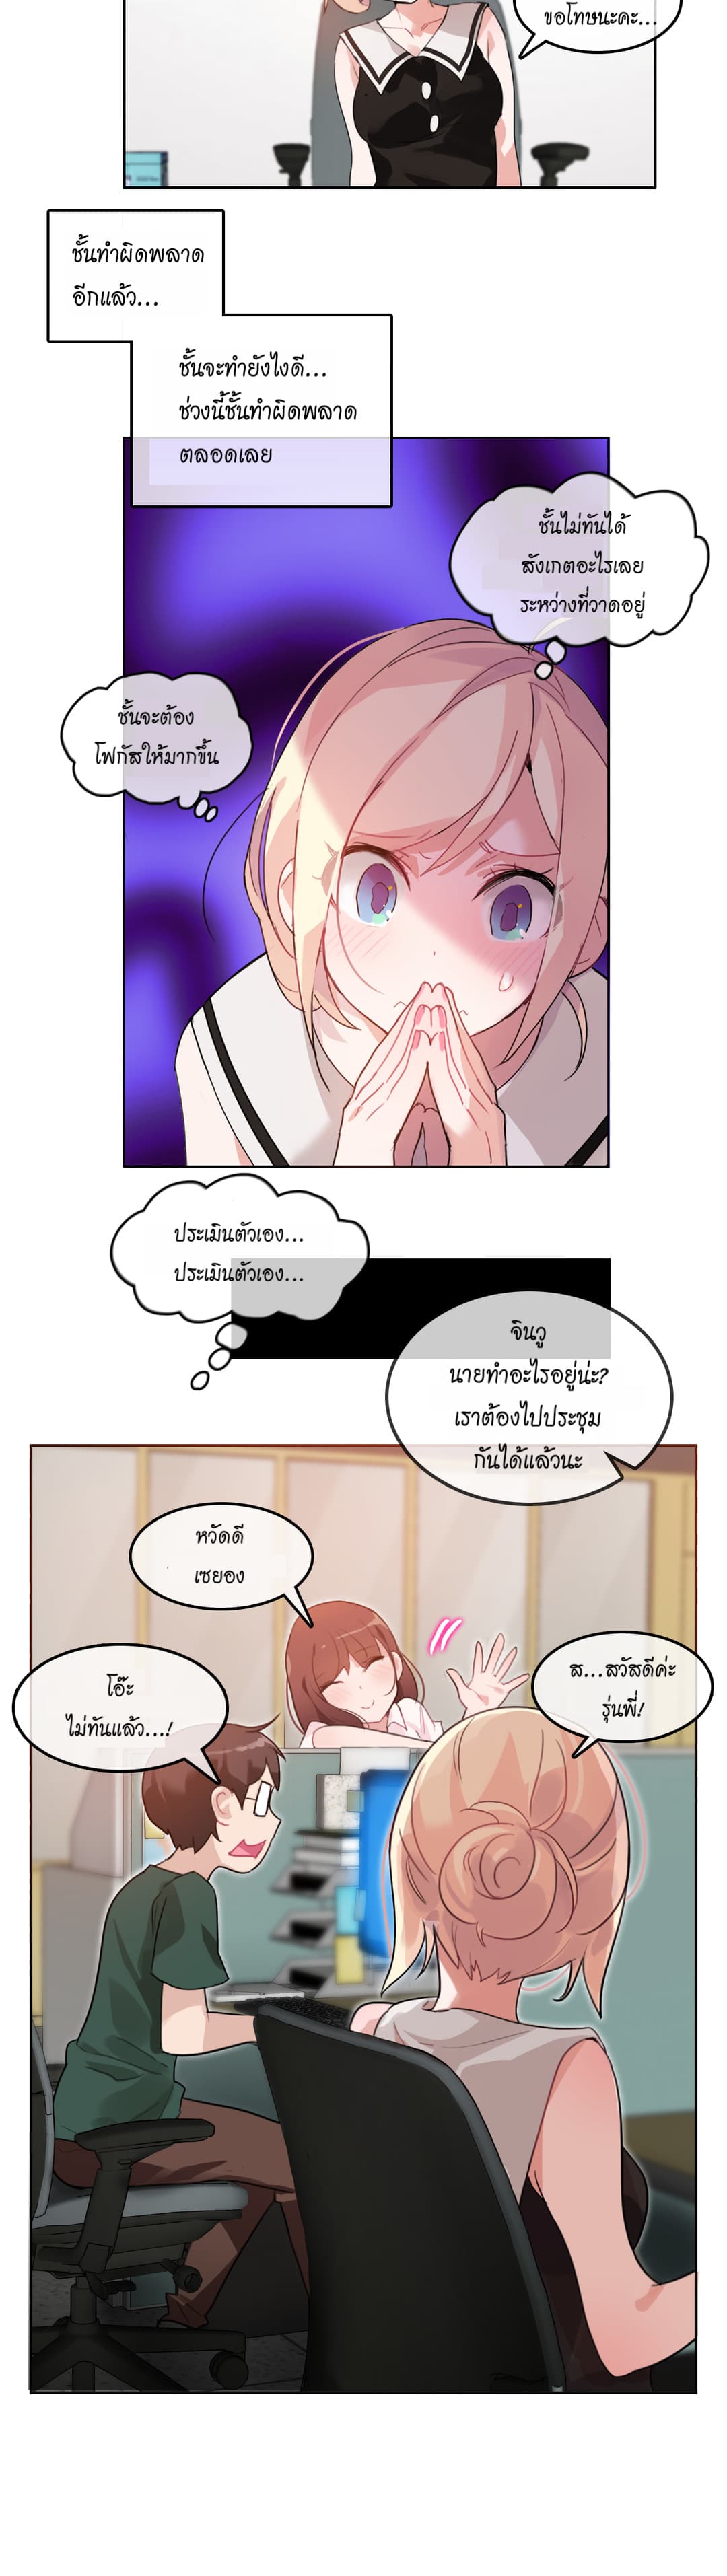 A Pervert’s Daily Life 13 (6)